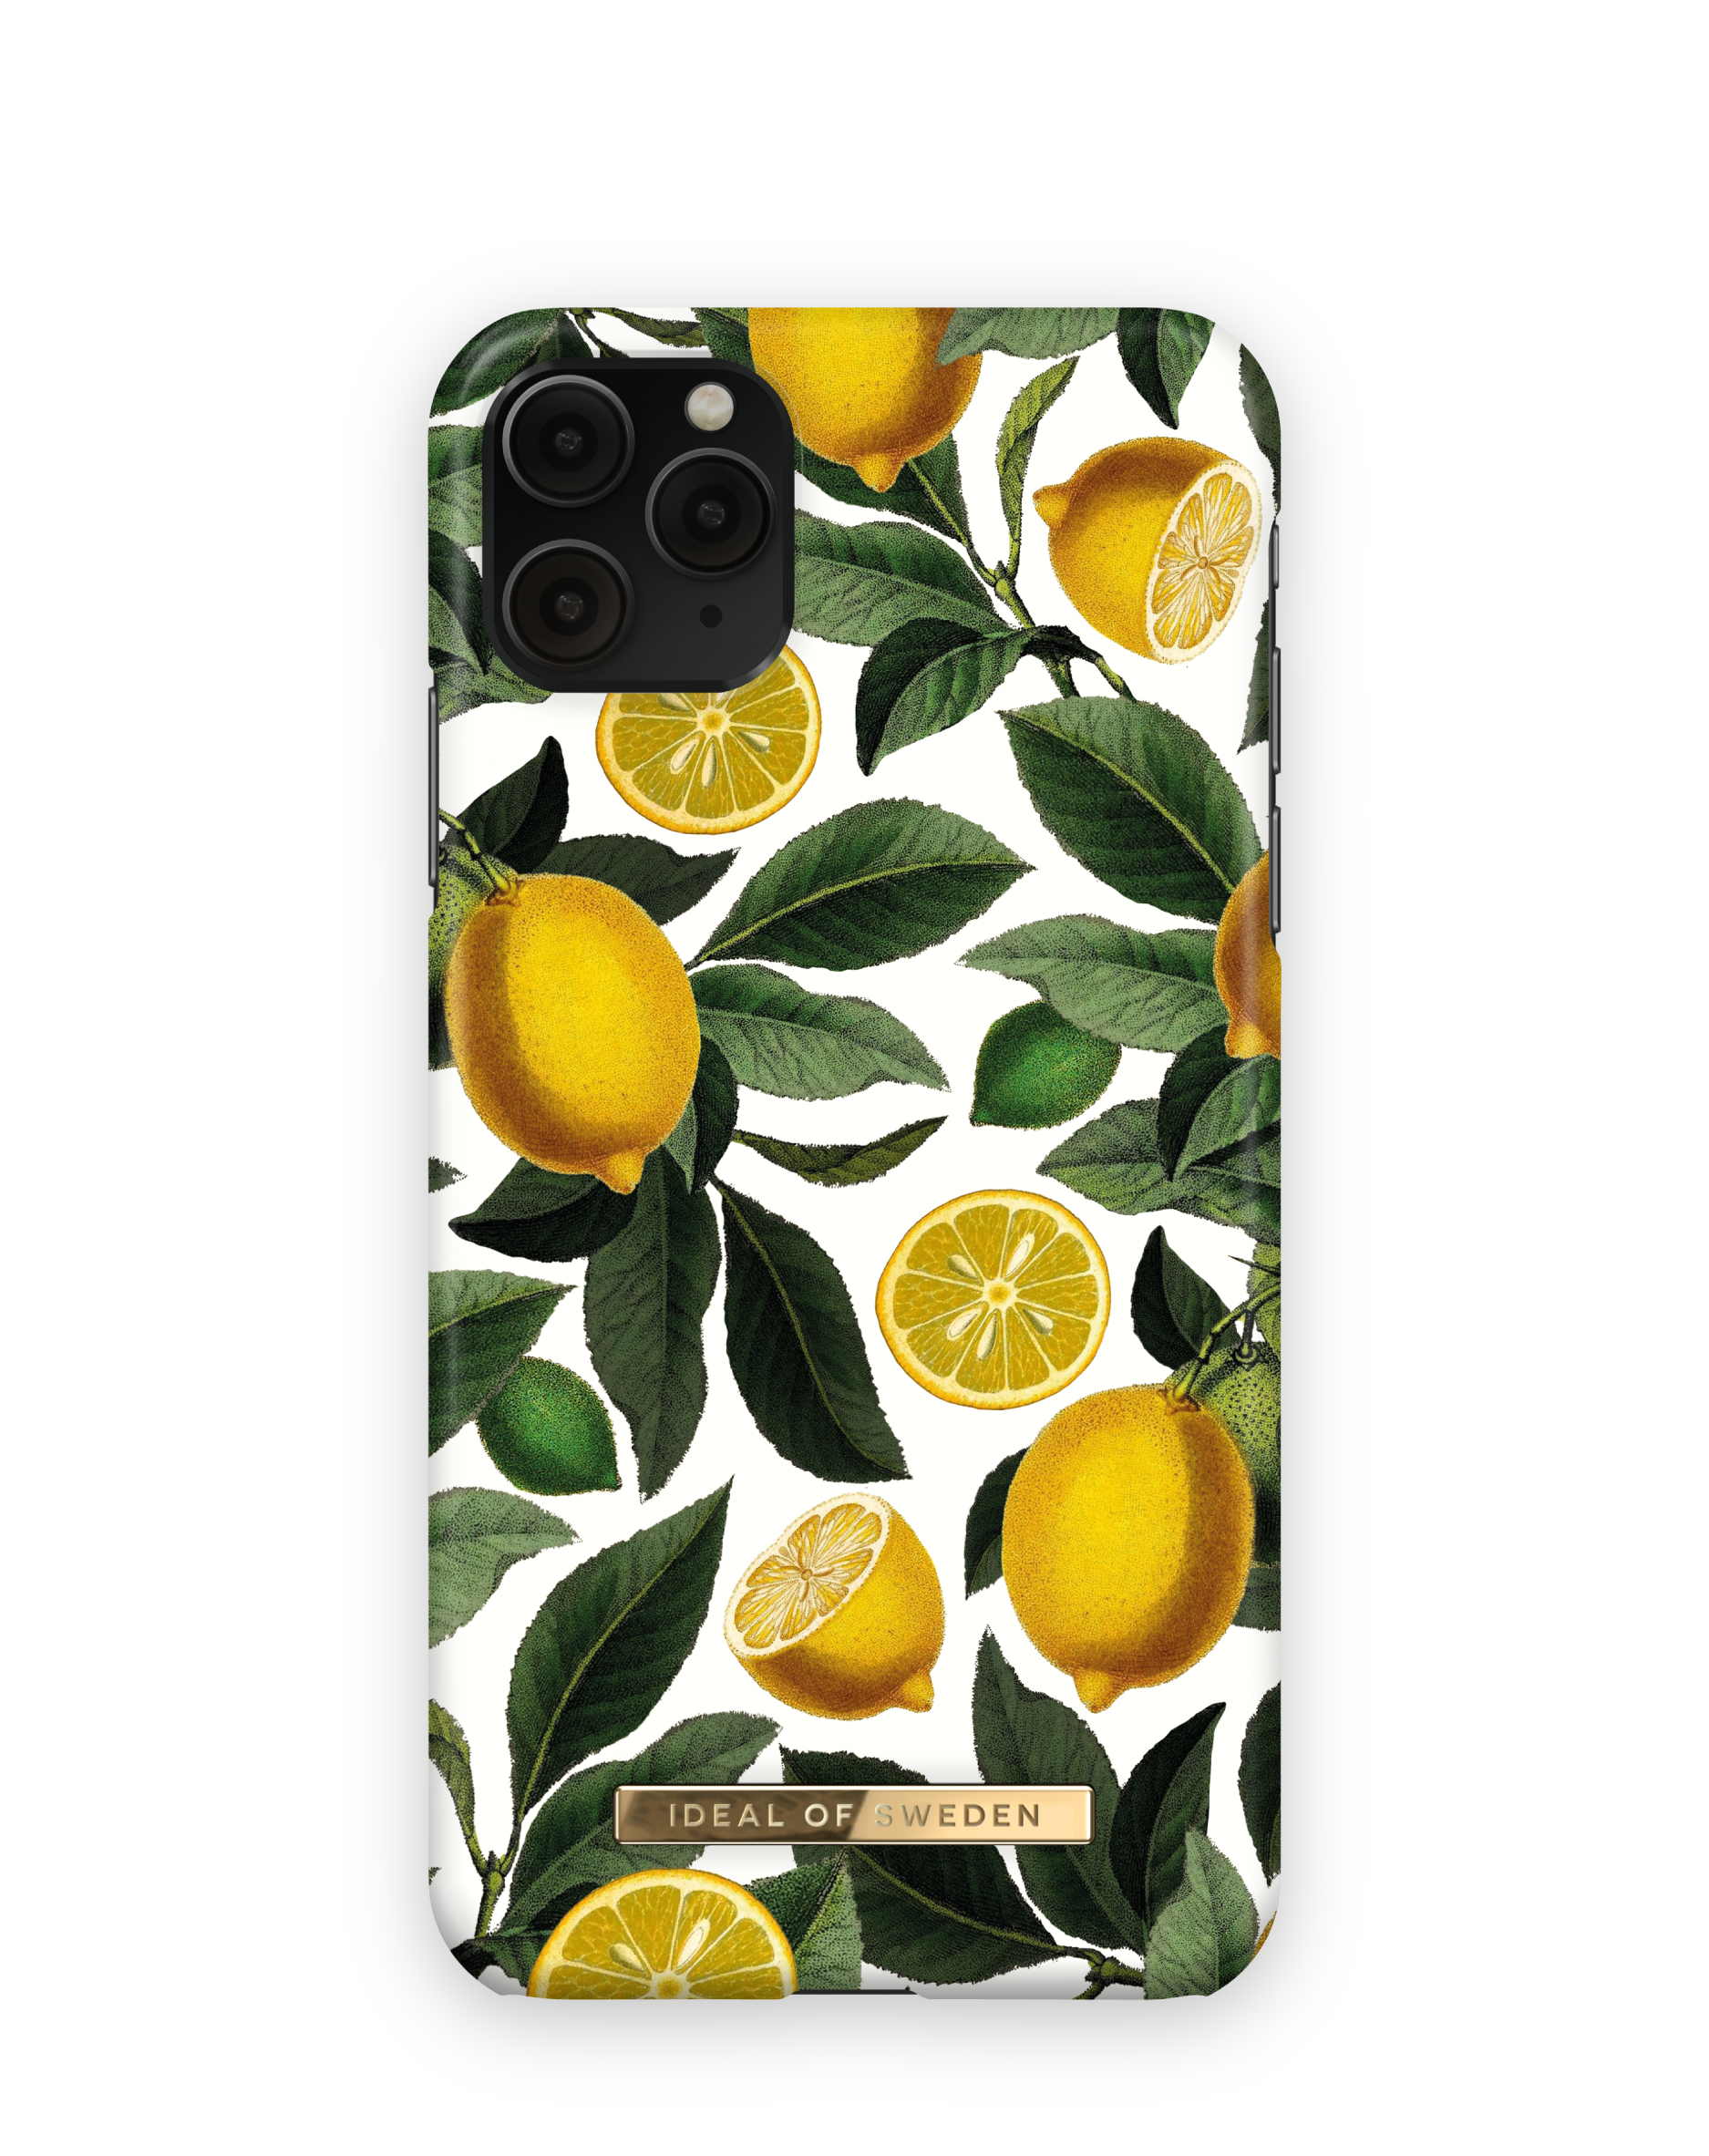 Apple Apple, Max, IDFCSS20-I1965-196, SWEDEN Pro 11 Bliss Backcover, Max, iPhone IDEAL Apple Lemon XS OF iPhone